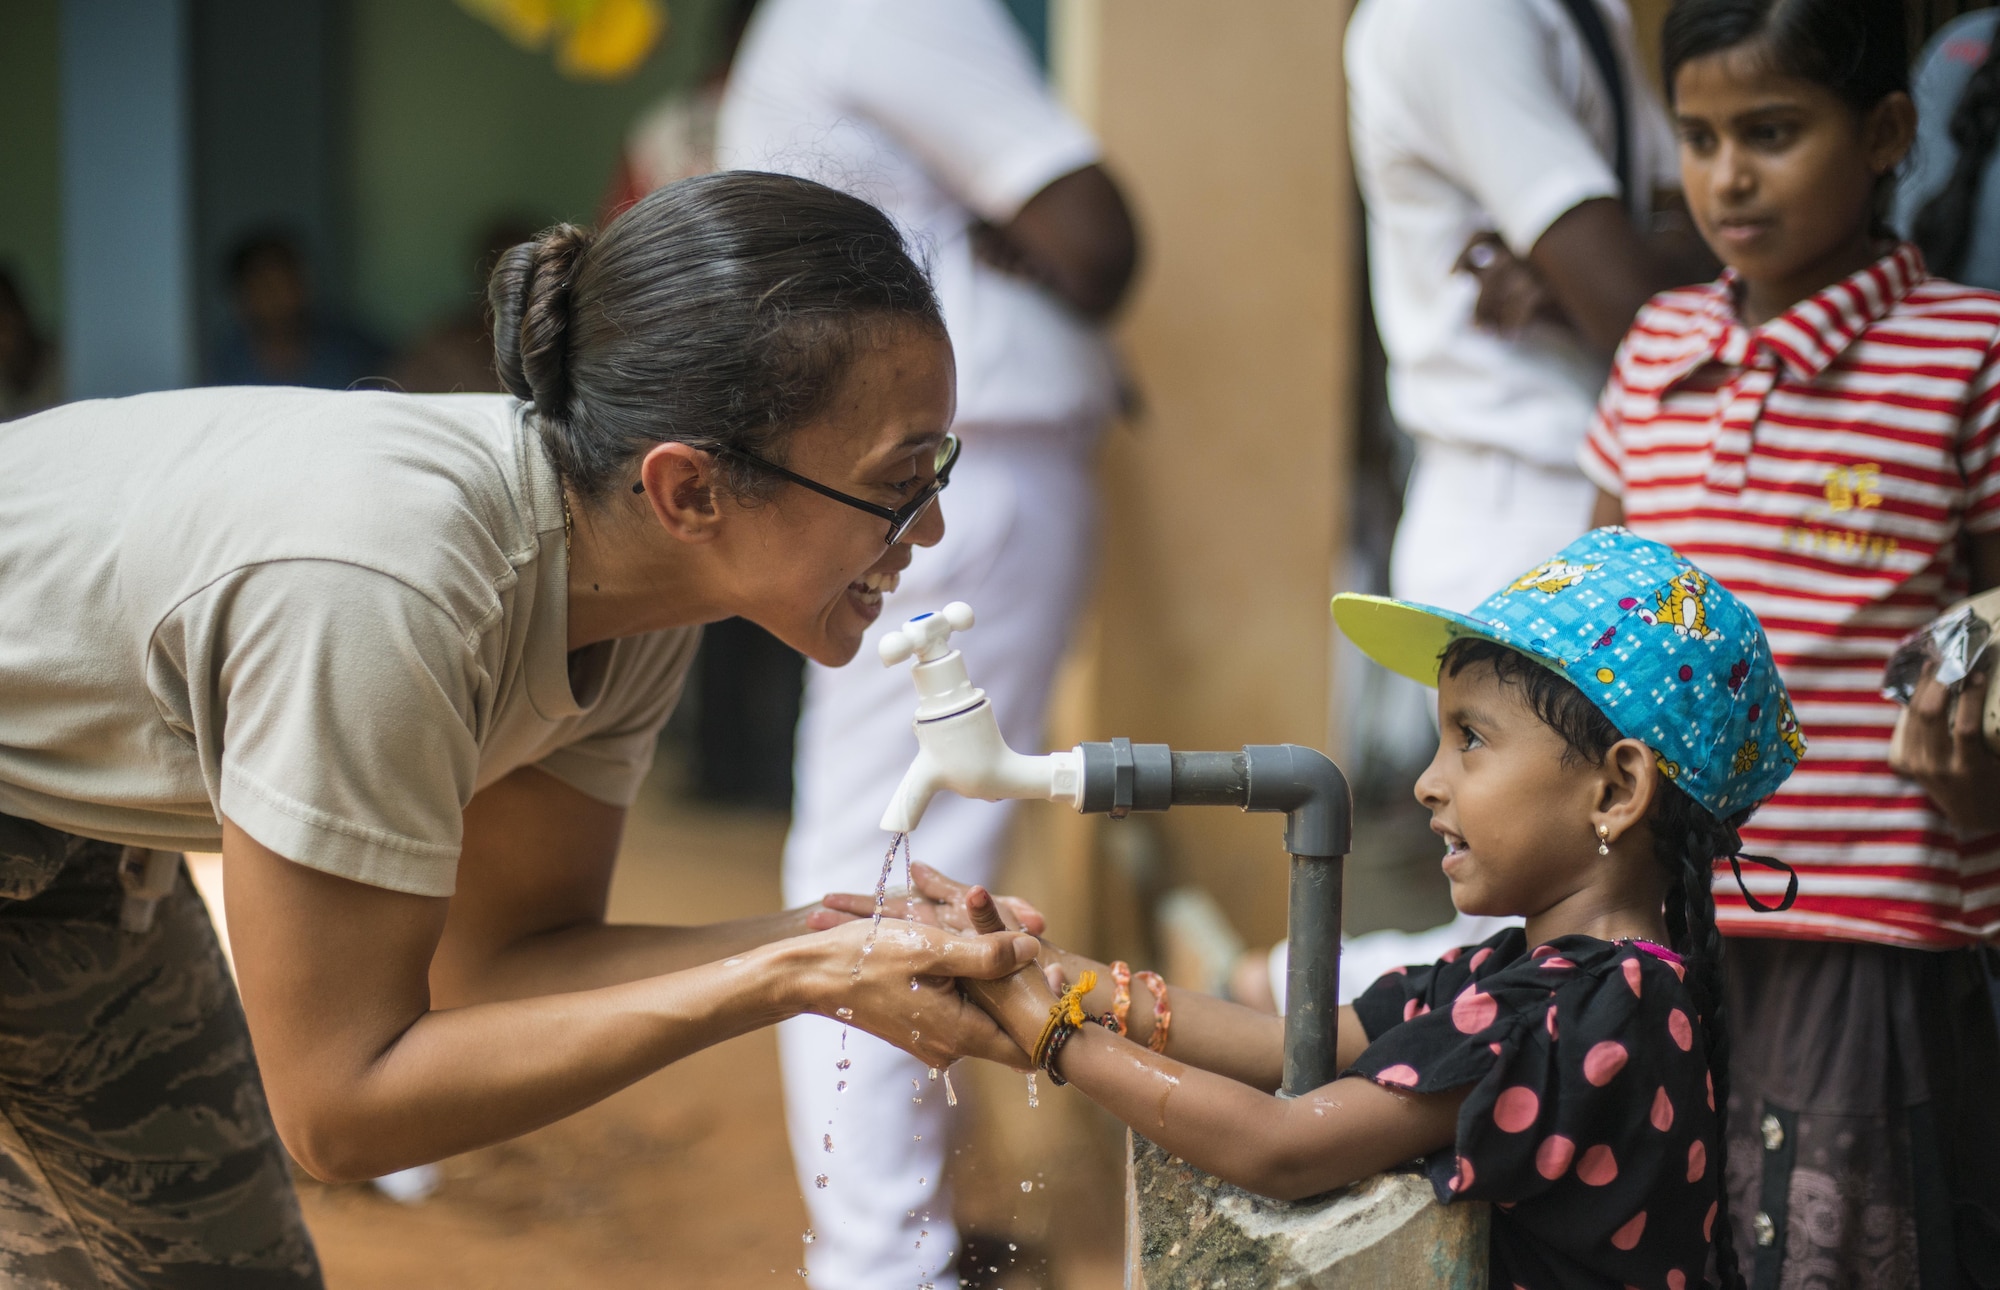 U.S. Air Force Staff Sgt. Yesenia Benjamin, 18th Medical Group public health technician, teaches a Sri Lankan child how to properly wash her hands during Pacific Angel (PACANGEL) 16-3 in Jaffna, Sri Lanka, Aug. 16, 2016. Now entering its ninth year, Operation PACANGEL ensures that the region’s militaries are prepared to work together to address humanitarian crises. Since 2007, PACANGEL operations have improved the lives of tens of thousands of people. (U.S. Air Force photo by Senior Airman Brittany A. Chase)